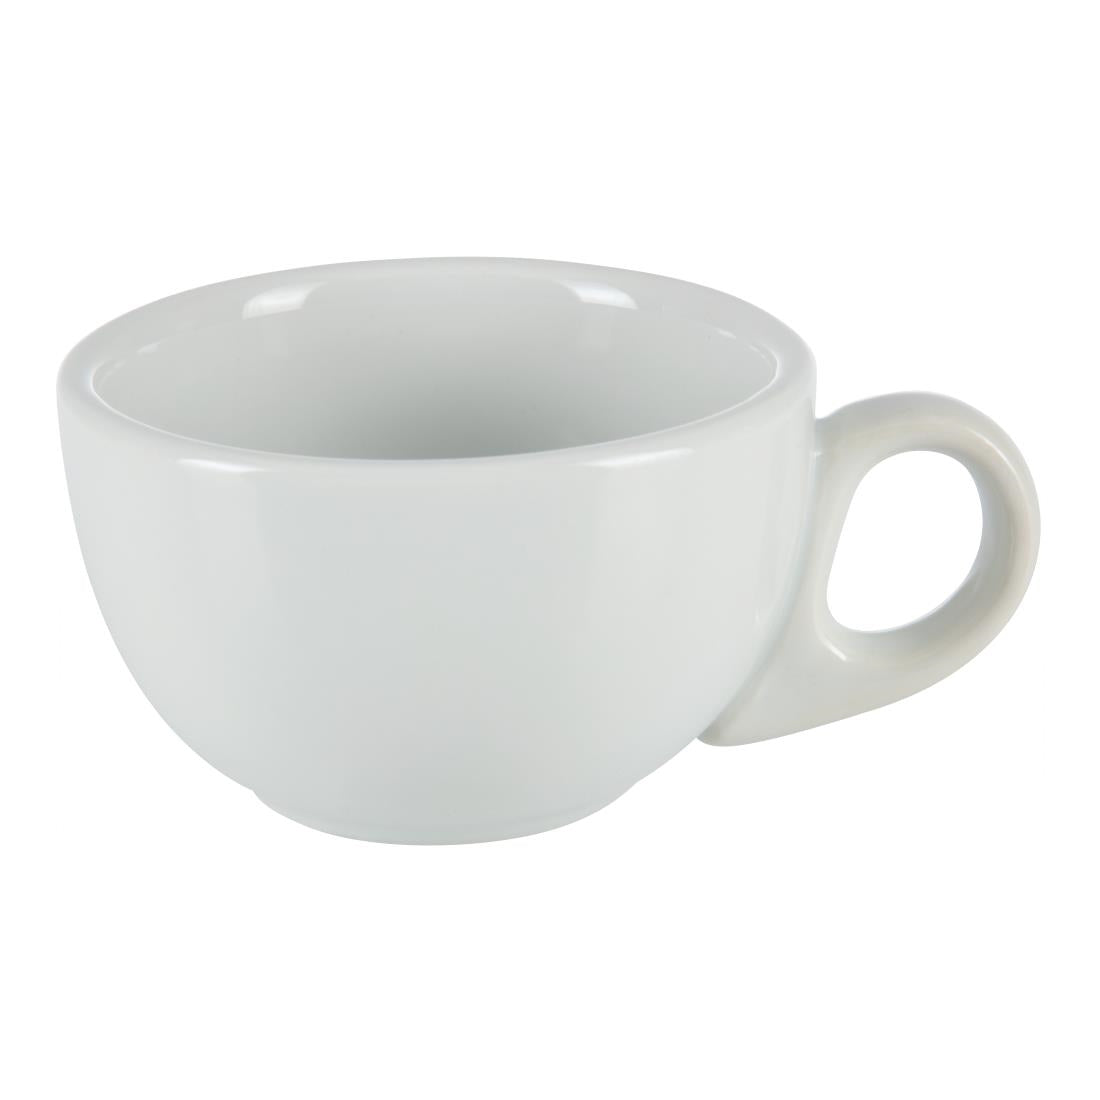 Athena Hotelware Cappuccino Cups 8oz (Pack of 24) JD Catering Equipment Solutions Ltd